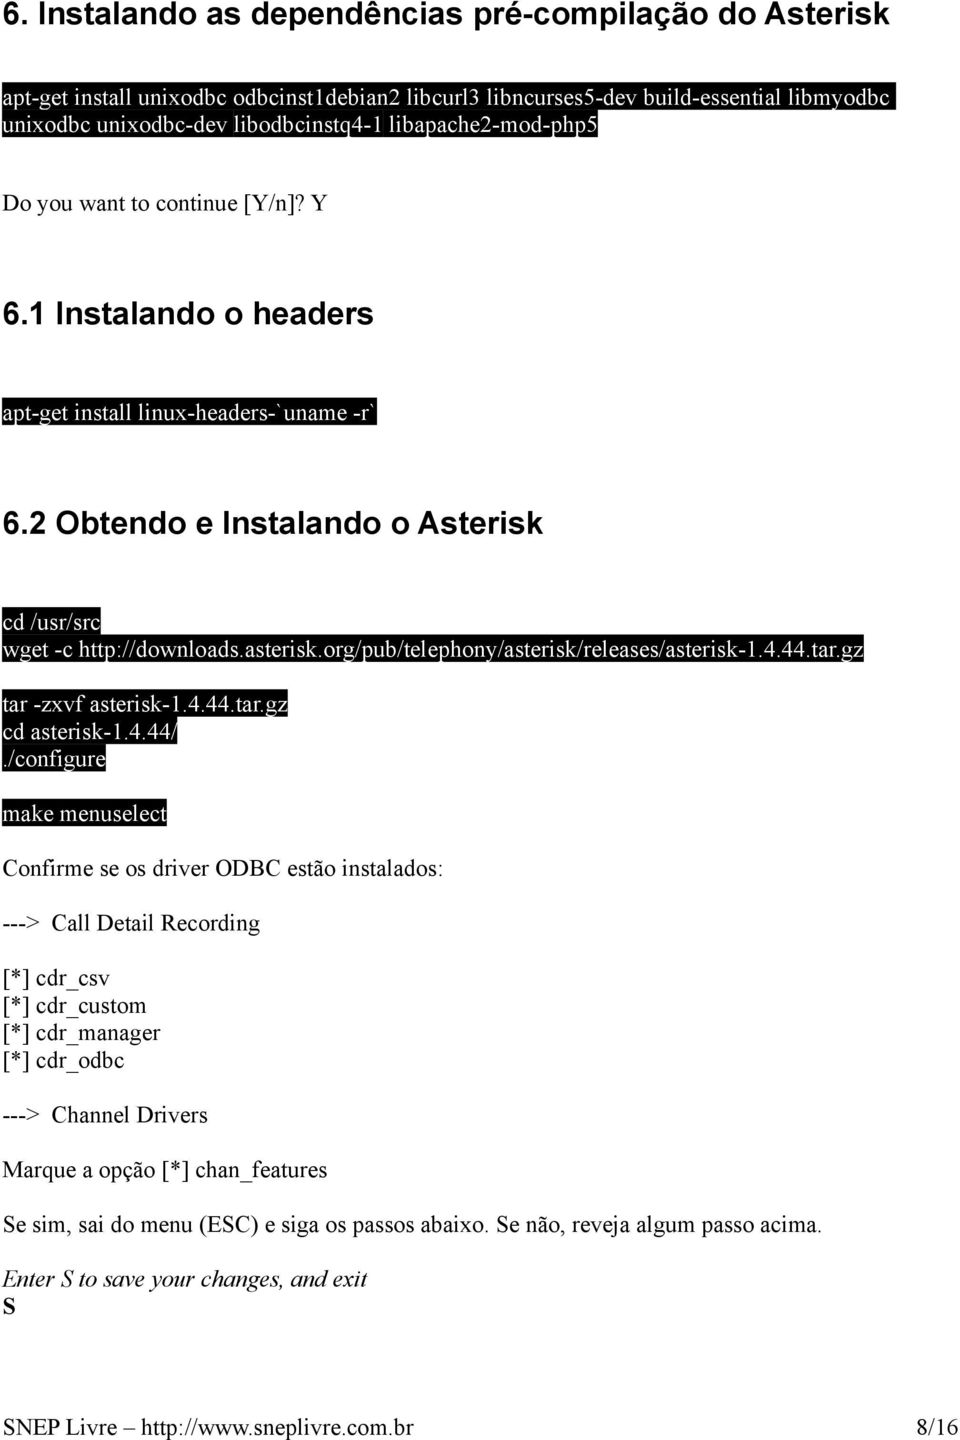 asterisk.org/pub/telephony/asterisk/releases/asterisk-1.4.44.tar.gz tar -zxvf asterisk-1.4.44.tar.gz cd asterisk-1.4.44/.